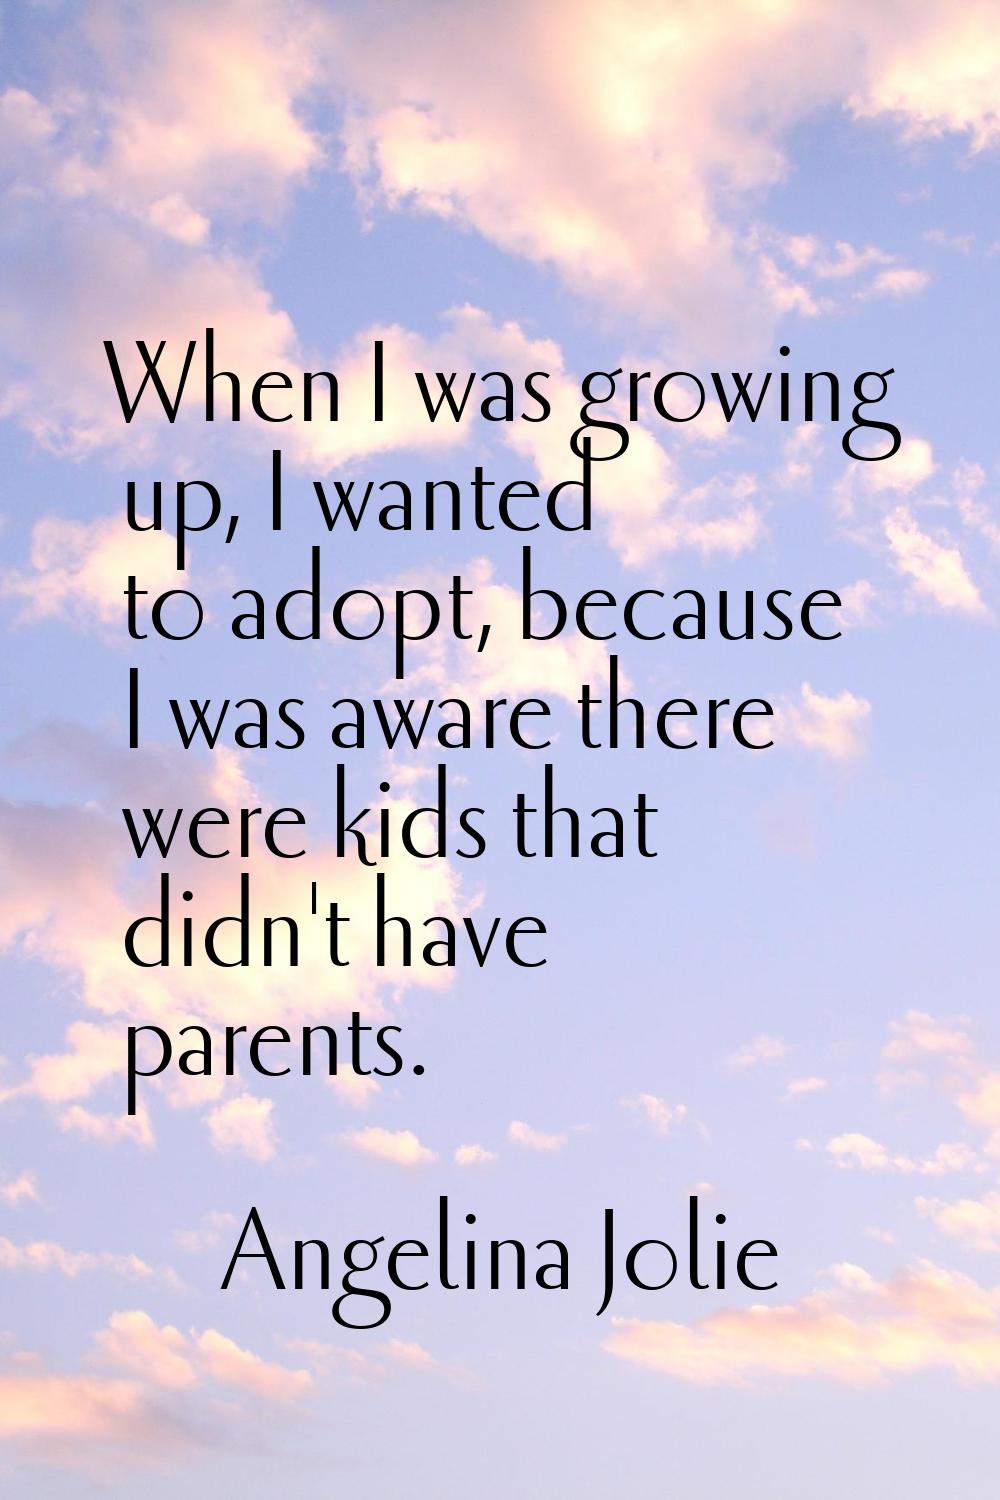 When I was growing up, I wanted to adopt, because I was aware there were kids that didn't have pare